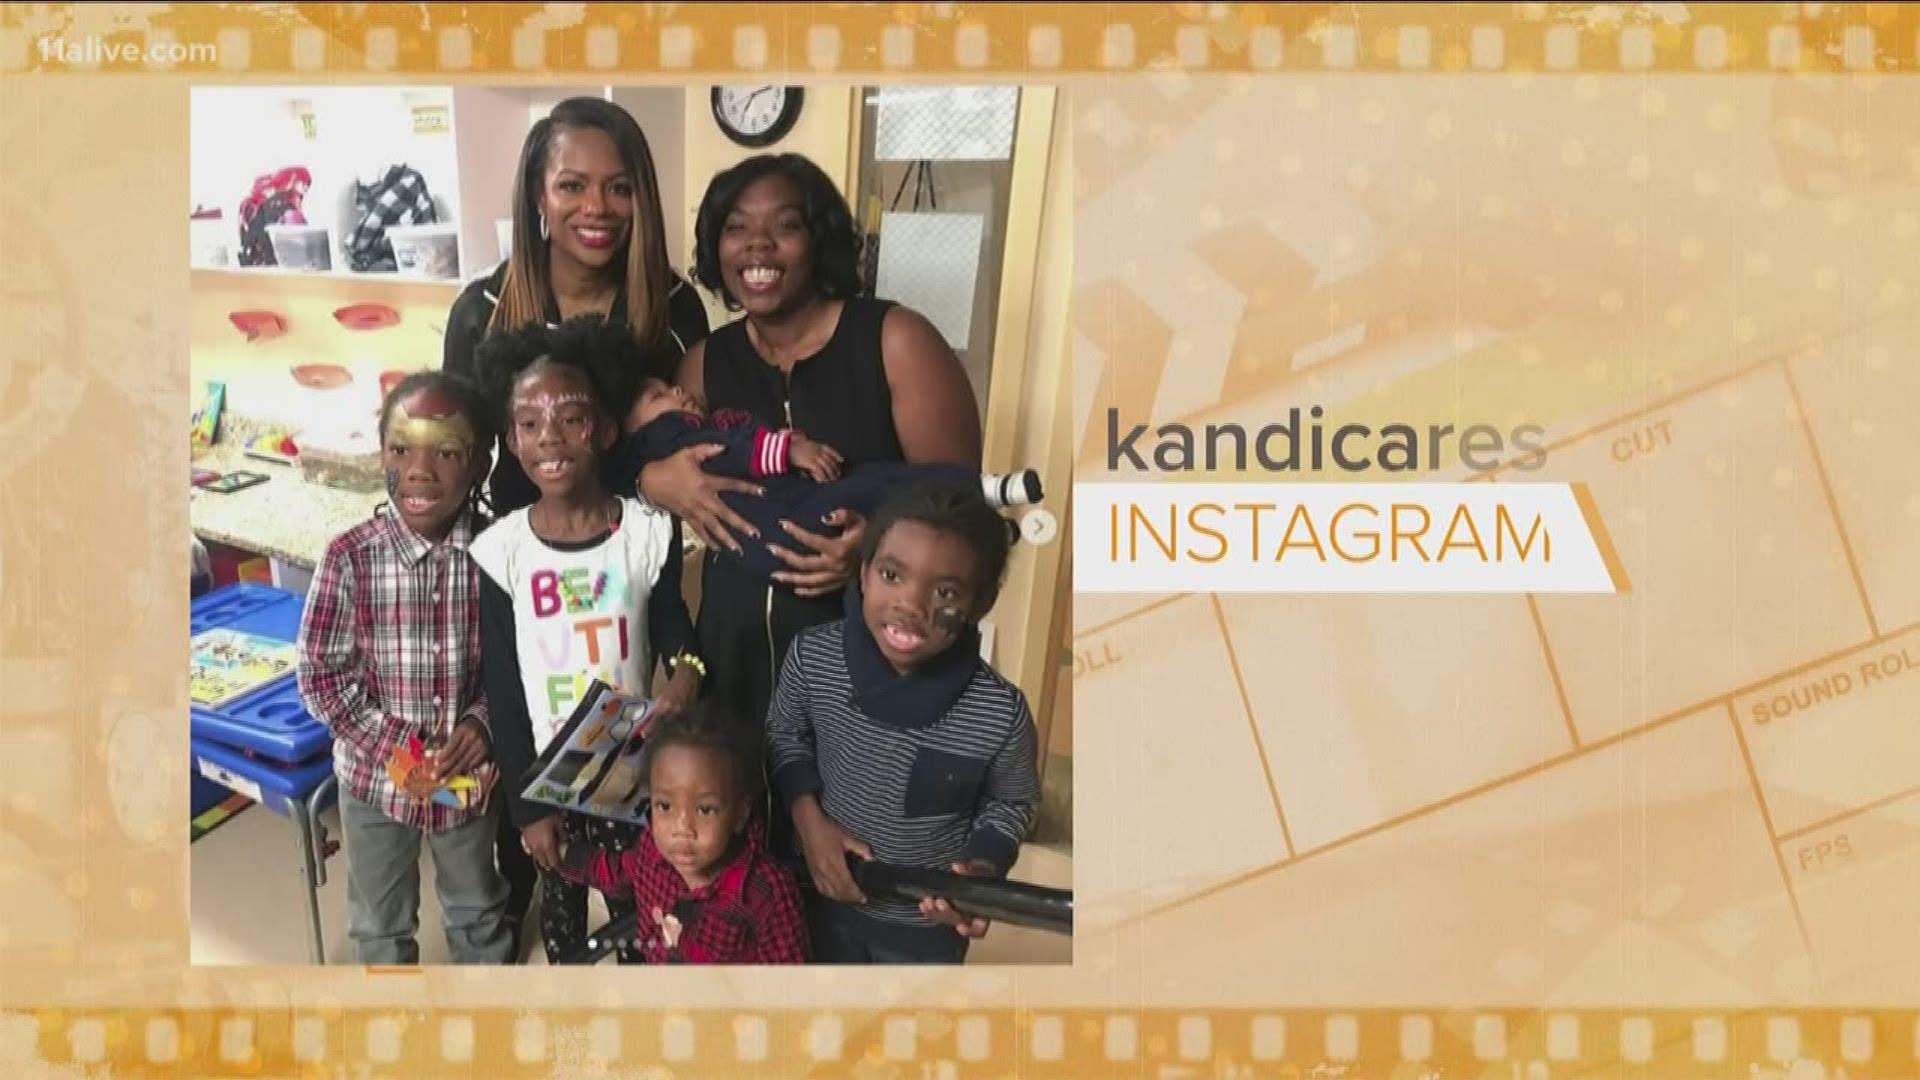 Kandi selected "Our House" to provide fun and food for the people there.